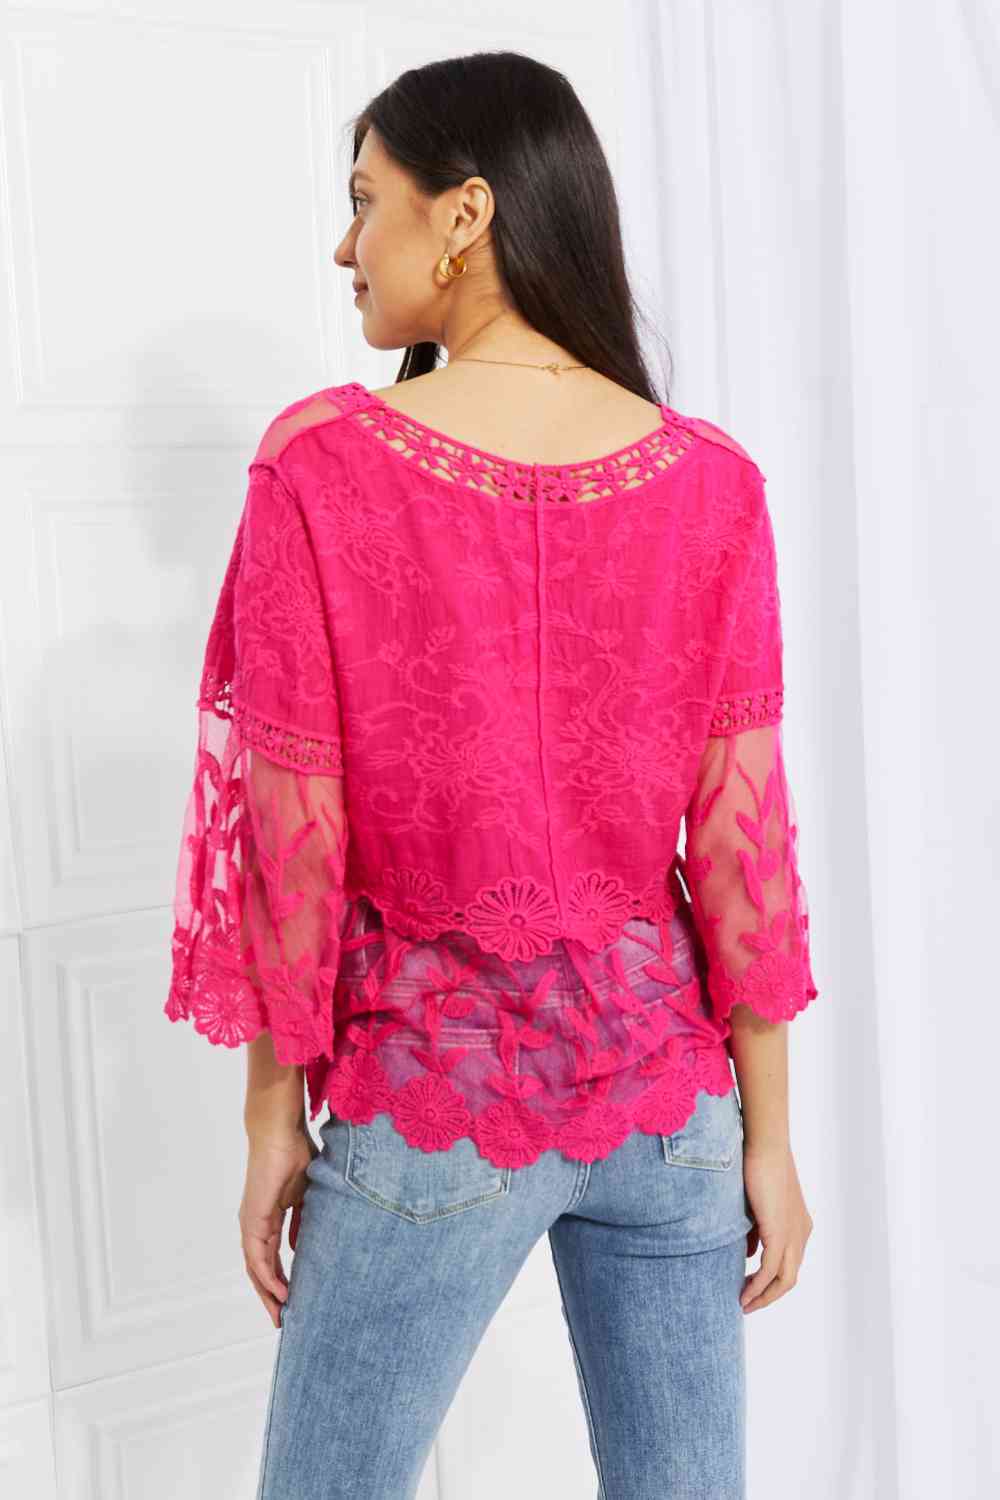 Lace Oasis Top - Camis & Tops - Shirts & Tops - 2 - 2024